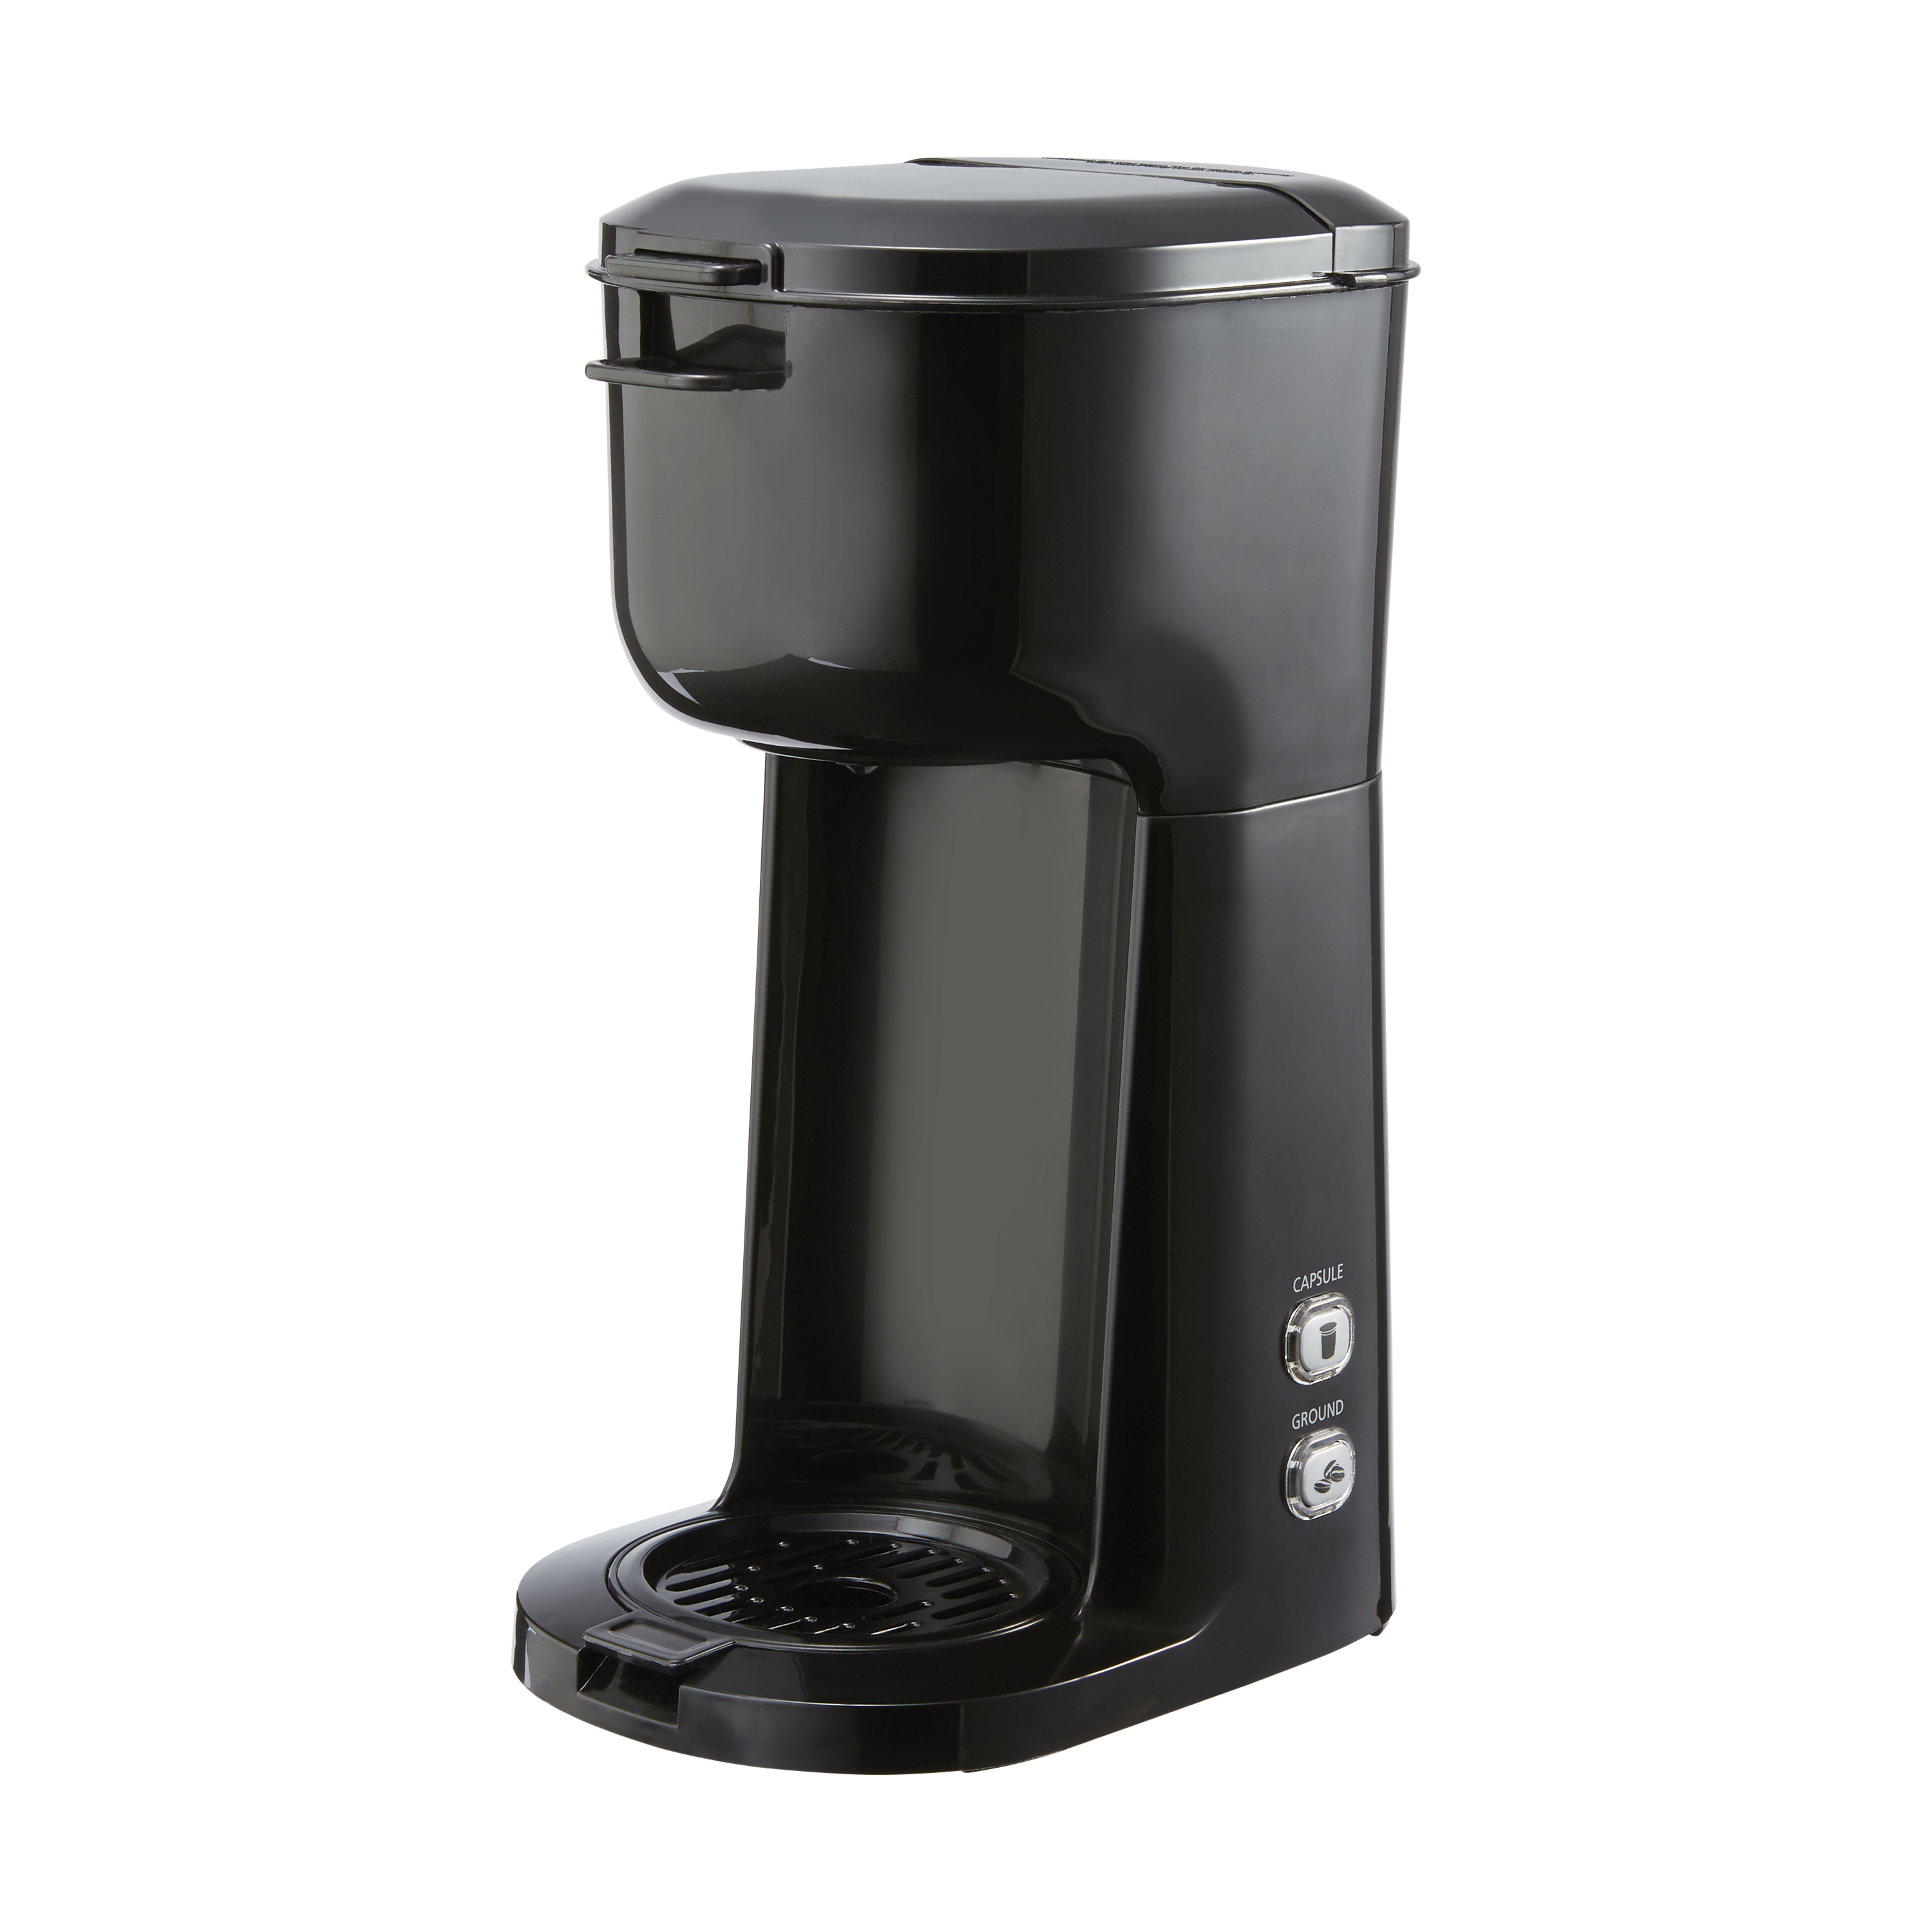 Mainstays Single Serve Coffee Maker, 1 cup Capsule or Ground Coffee, Black, New - image 1 of 6